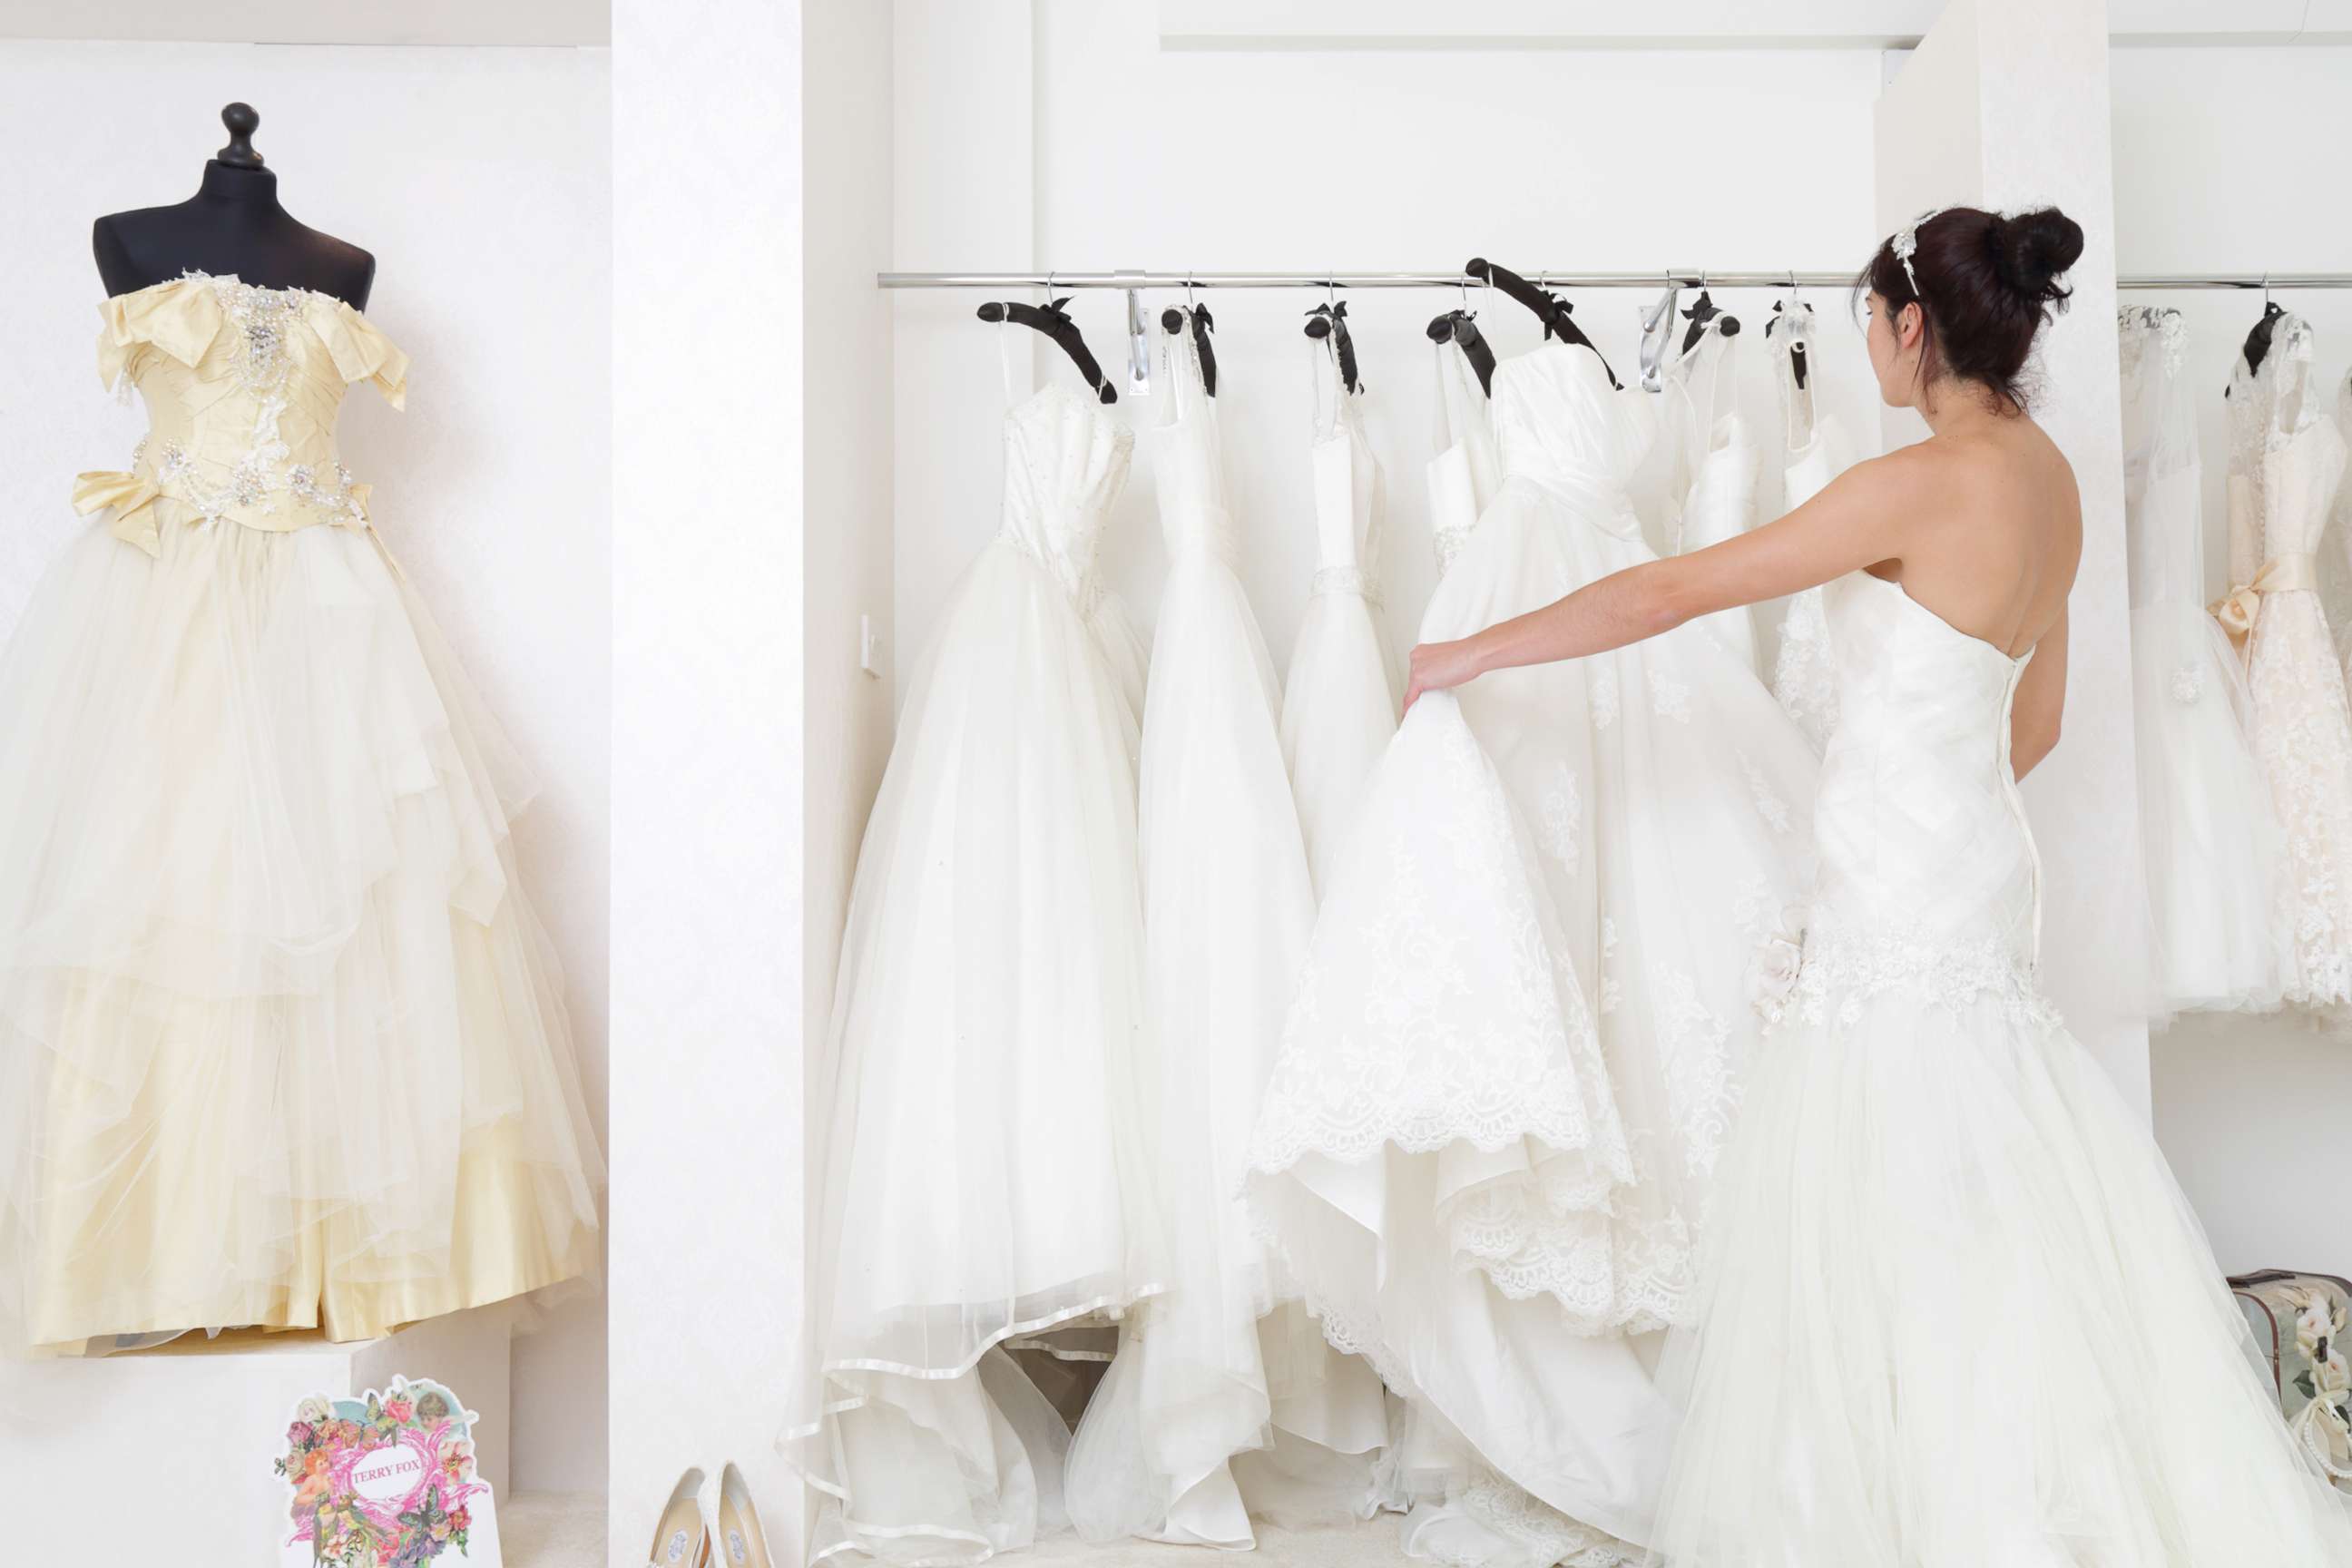 PHOTO: A woman looks for a wedding dress in a stock photo.